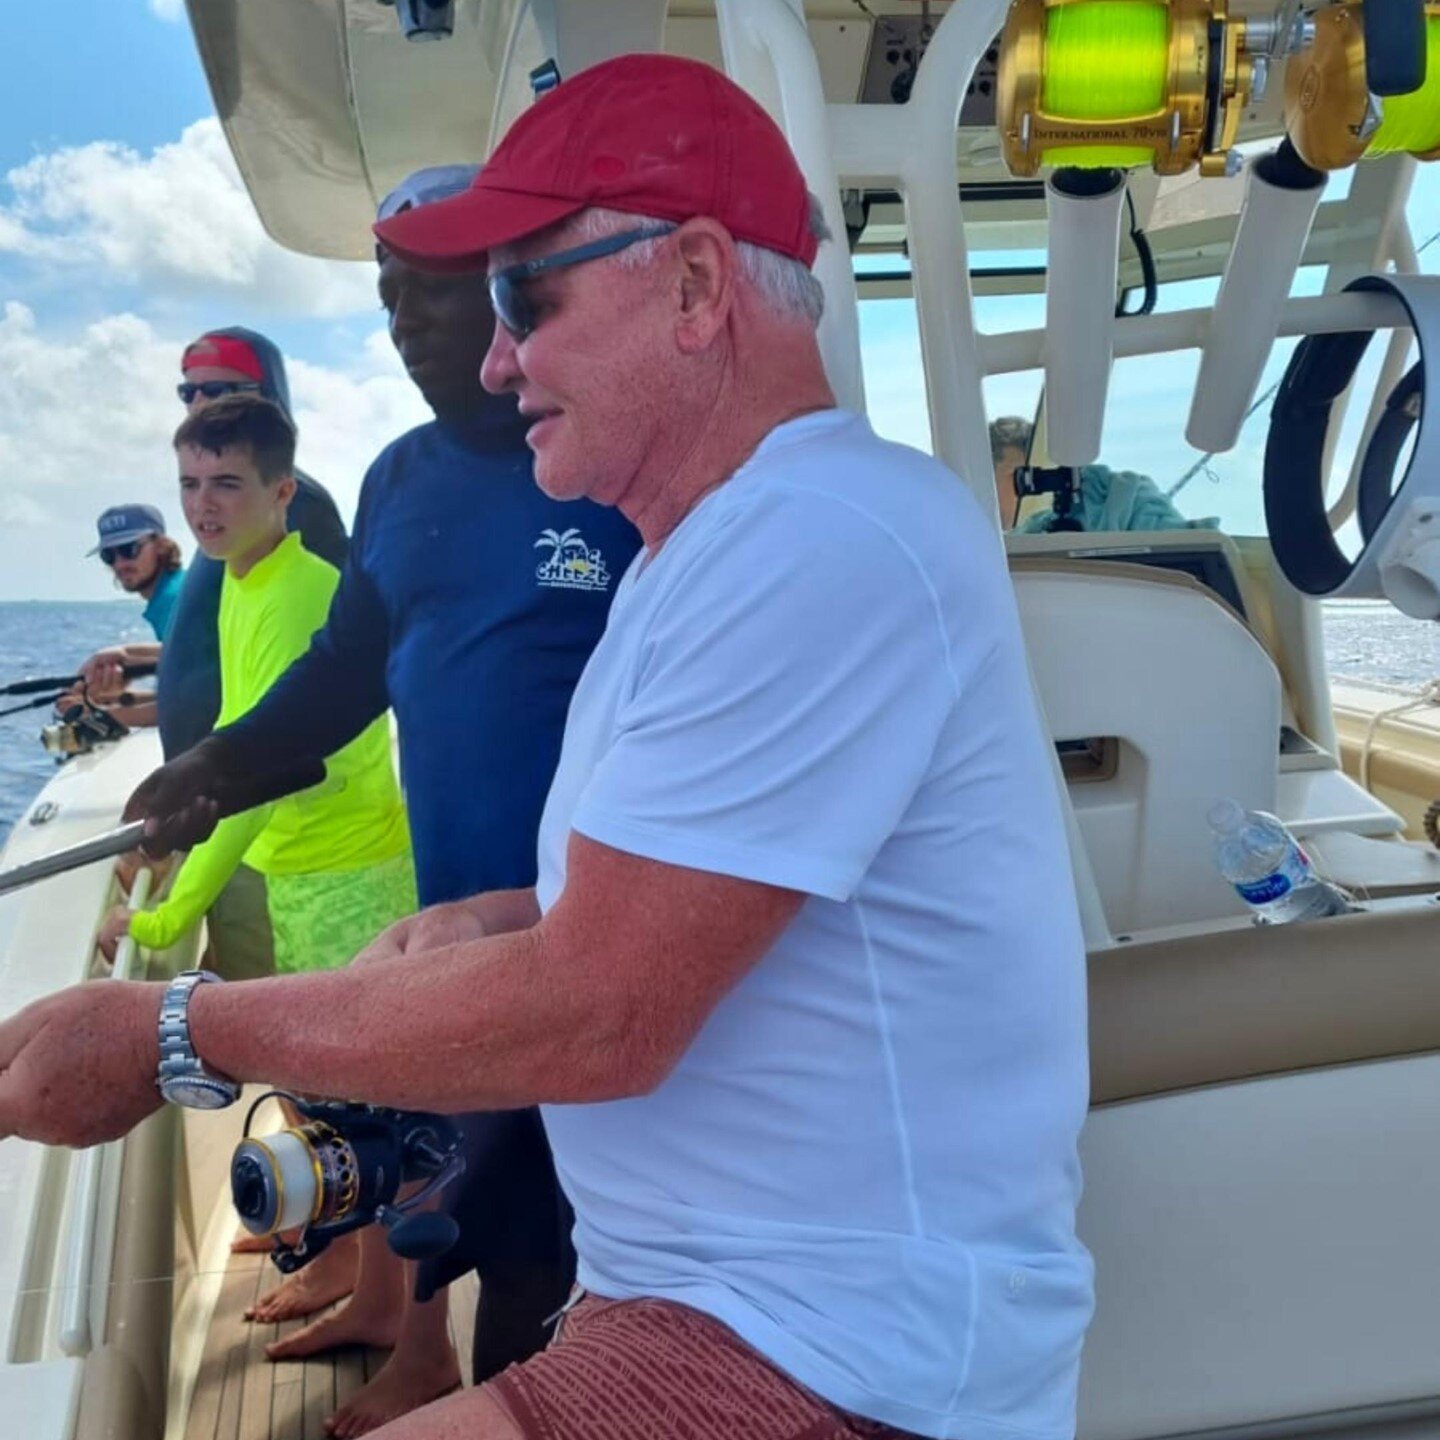 We offer premium sports fishing charters in the 🇹🇨Turks and Caicos for avid fishing enthusiasts. ⠀⠀⠀⠀⠀⠀⠀⠀⠀⁠
⠀⠀⠀⠀⠀⠀⠀⠀⠀⁠
Not interested in fishing?⠀⠀⠀⠀⠀⠀⠀⠀⠀⁠
⠀⠀⠀⠀⠀⠀⠀⠀⠀⁠
Our snorkeling, sunset cruises, and beach cruising experiences for all the island